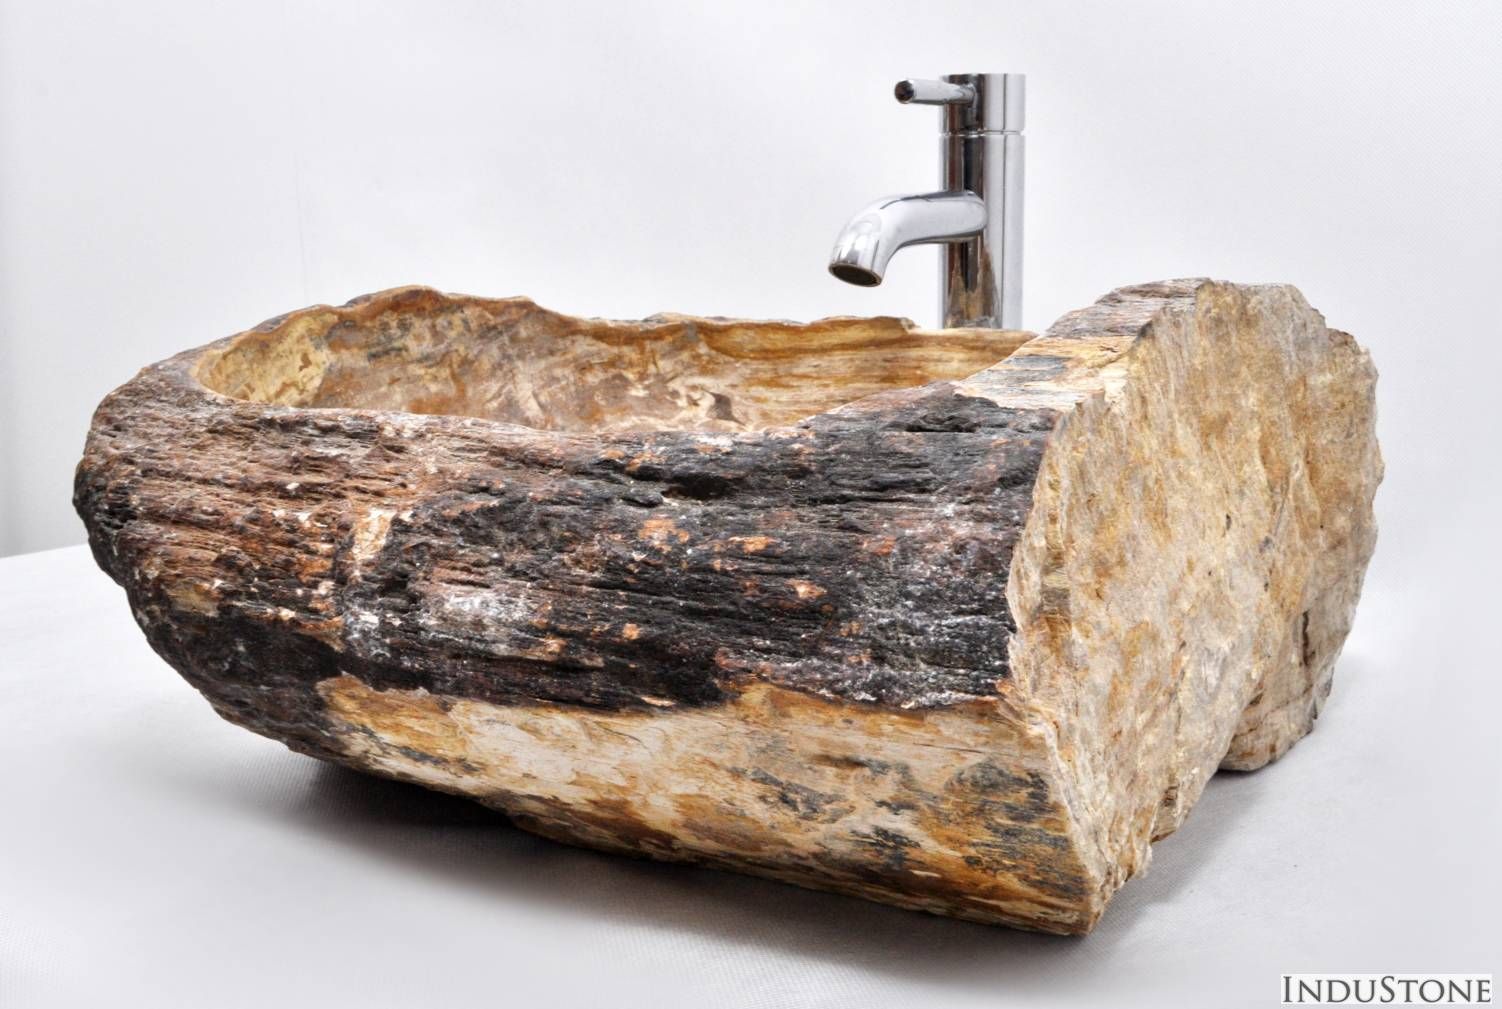 Umywalki kamienne i mozaika Fossil Wood, Industone.pl Industone.pl Phòng tắm phong cách chiết trung Sinks